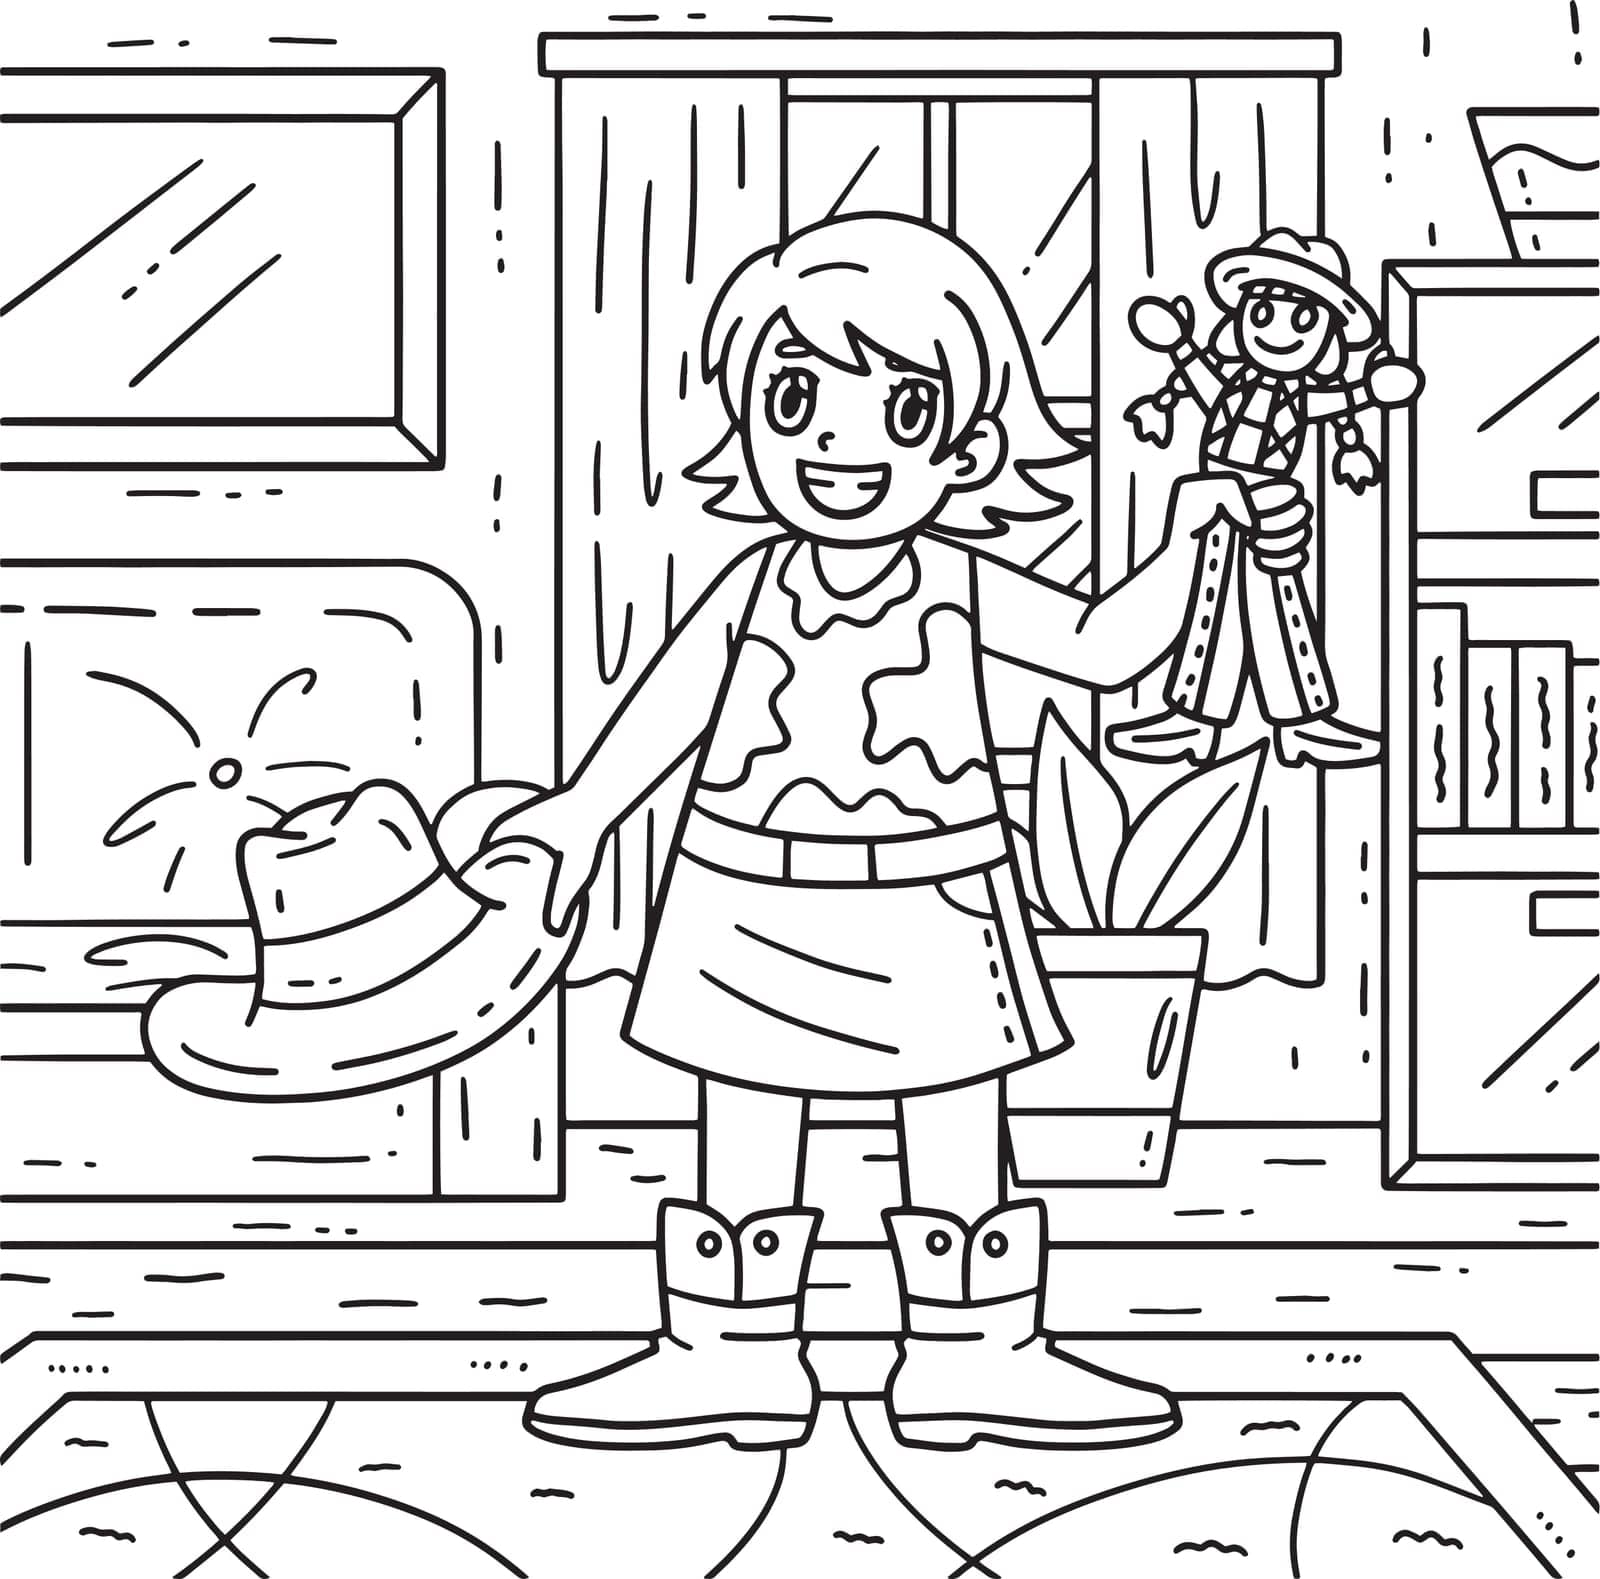 A cute and funny coloring page of a Cowgirl Child with Doll. Provides hours of coloring fun for children. To color, this page is very easy. Suitable for little kids and toddlers.